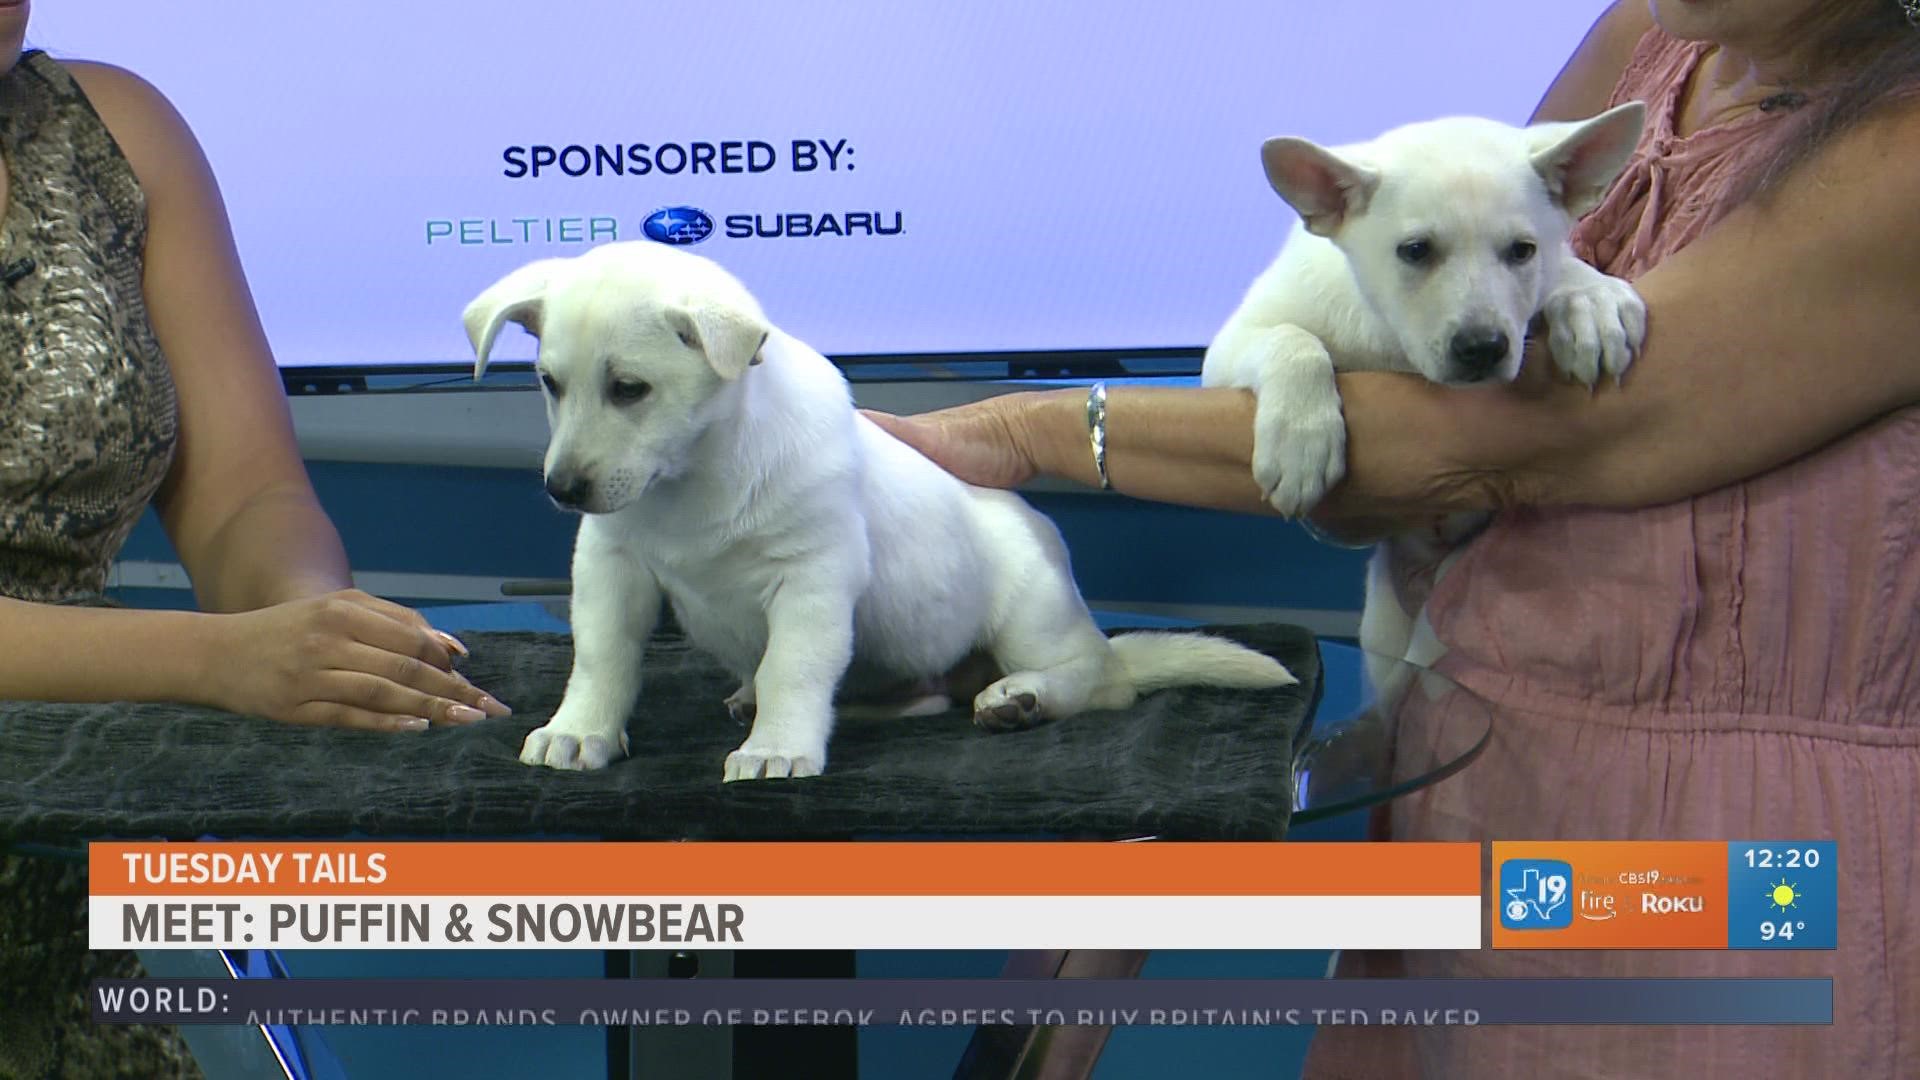 To adopt these sweet pups, visit spcaeasttx.com.